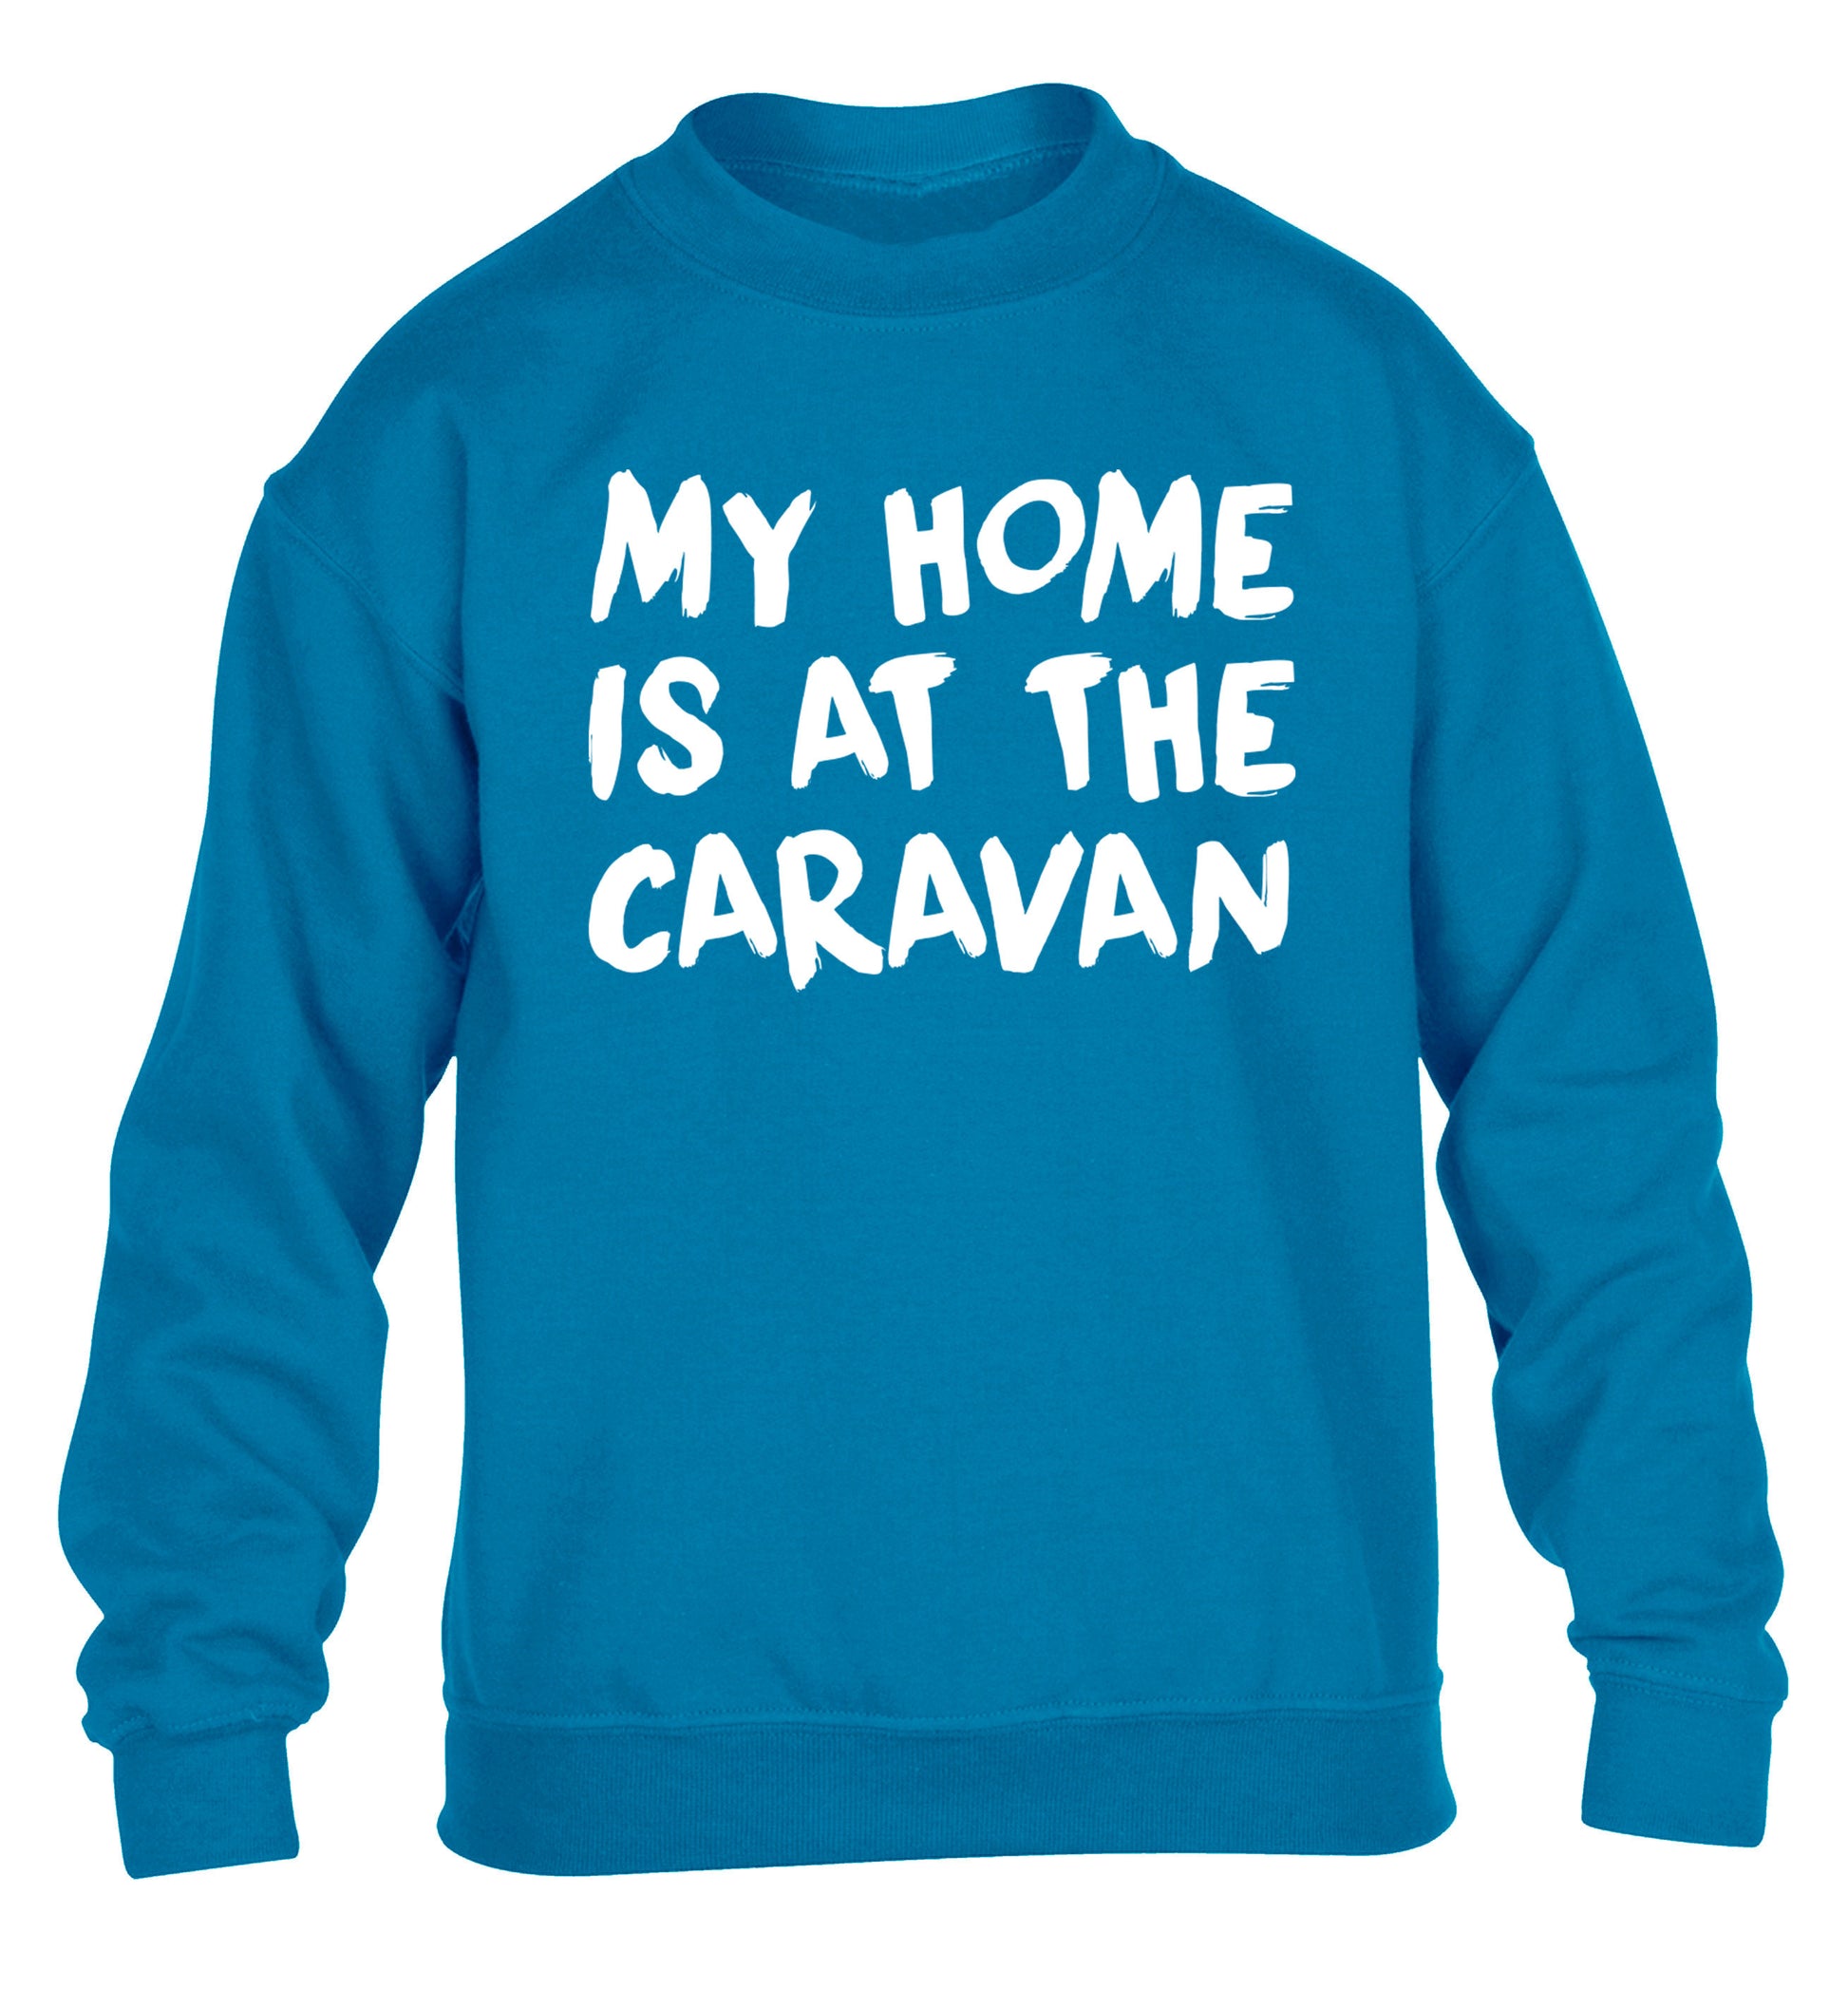 My home is at the caravan children's blue sweater 12-14 Years